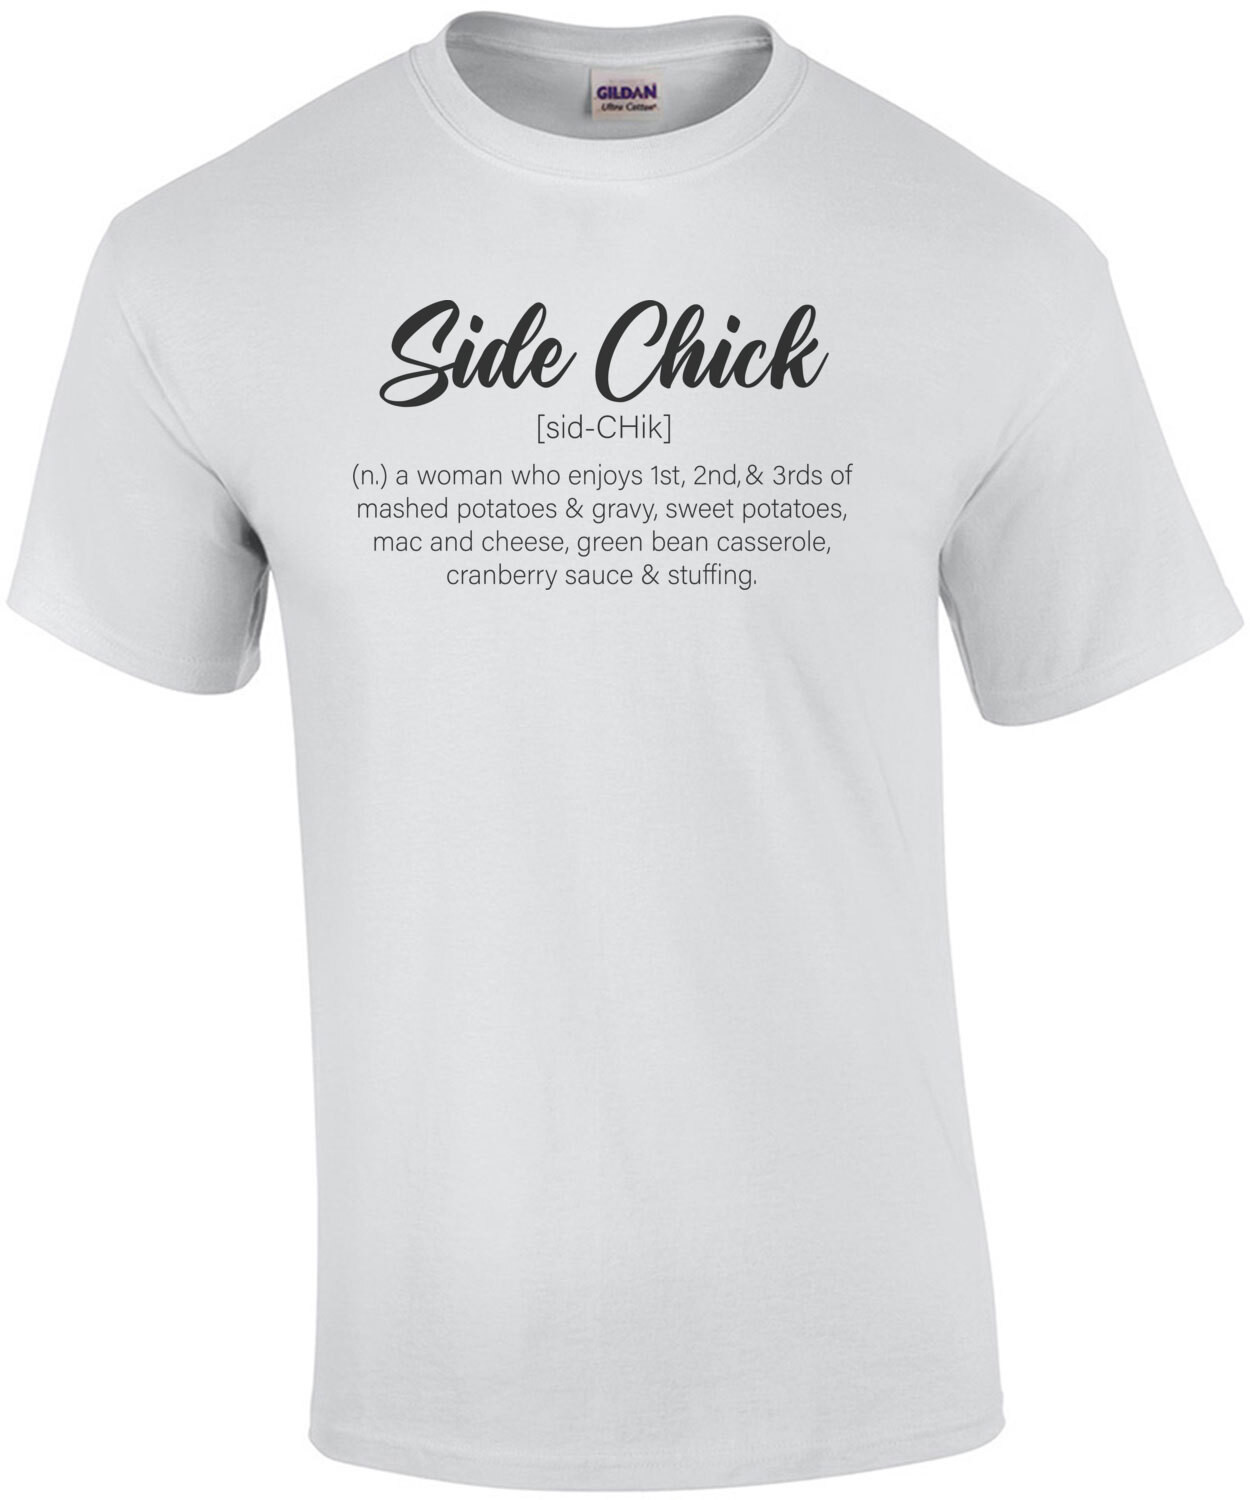 Side Chick - A women who enjoys all the sides - funny ladies thanksgiving t-shirt